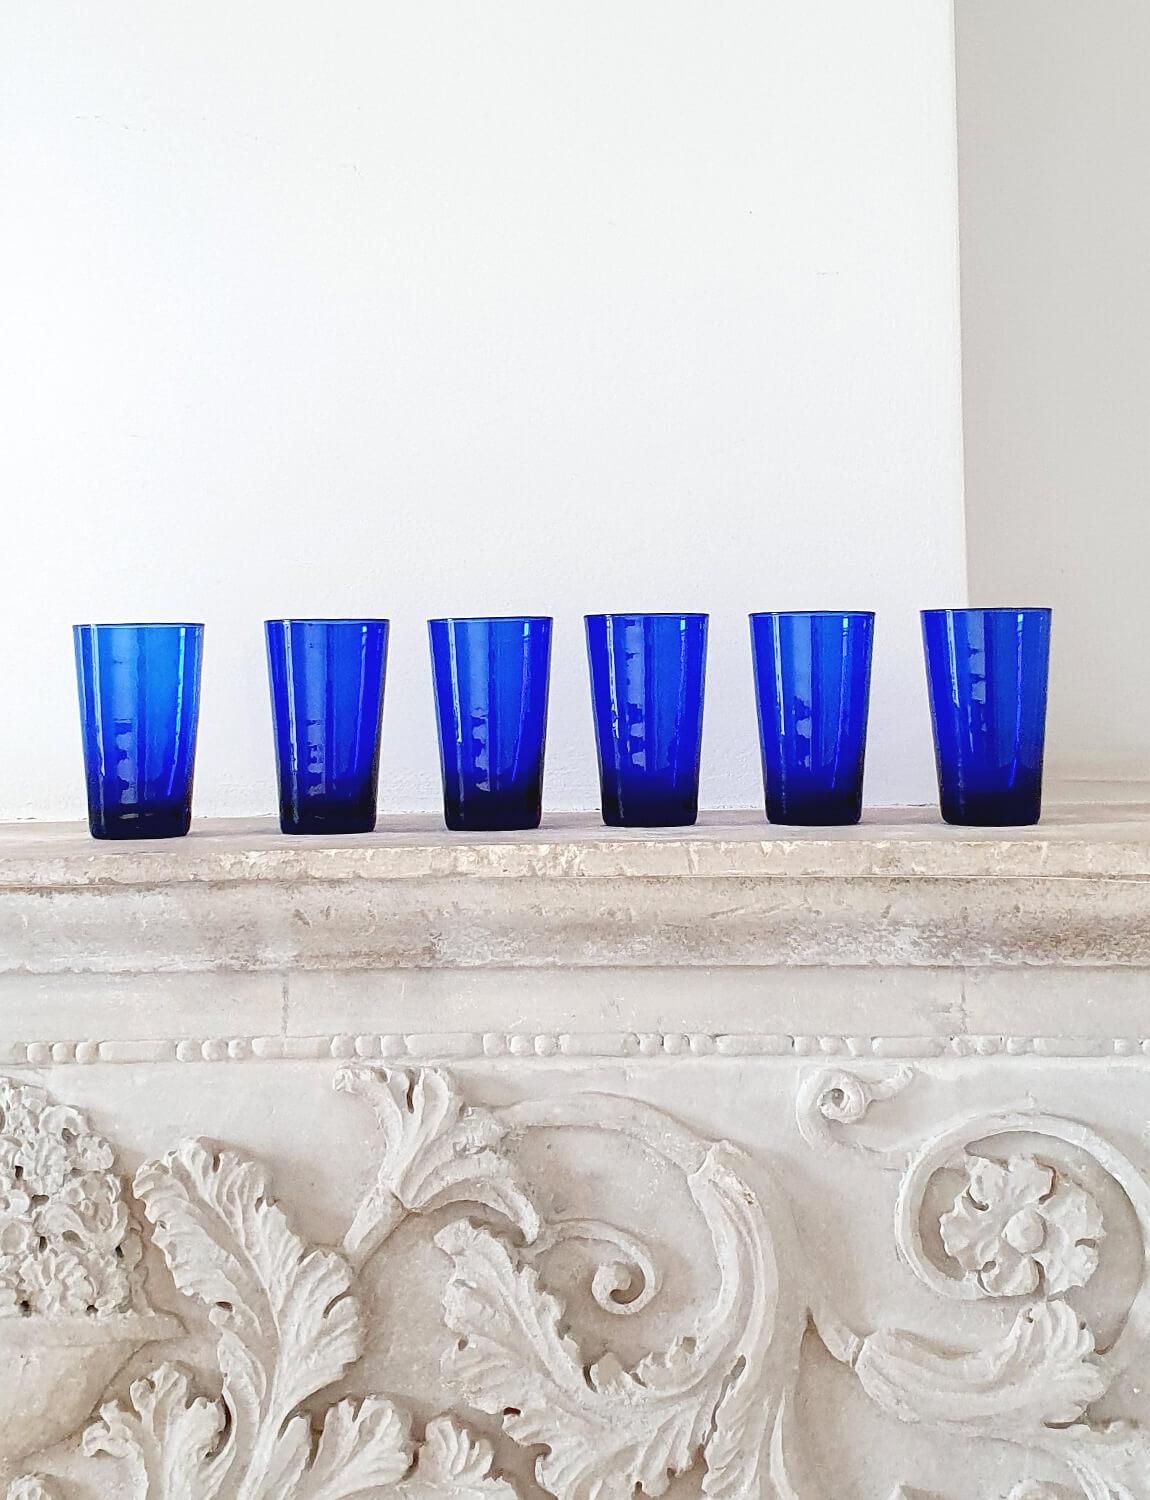 A set of six hand-blown amazing Empoli water glasses in vibrant blue. They are quite large (13cm tall) making them the perfect size for water glasses. Made in Empoli in the 1950s, they were found alongside a very few remaining pieces of Empoli